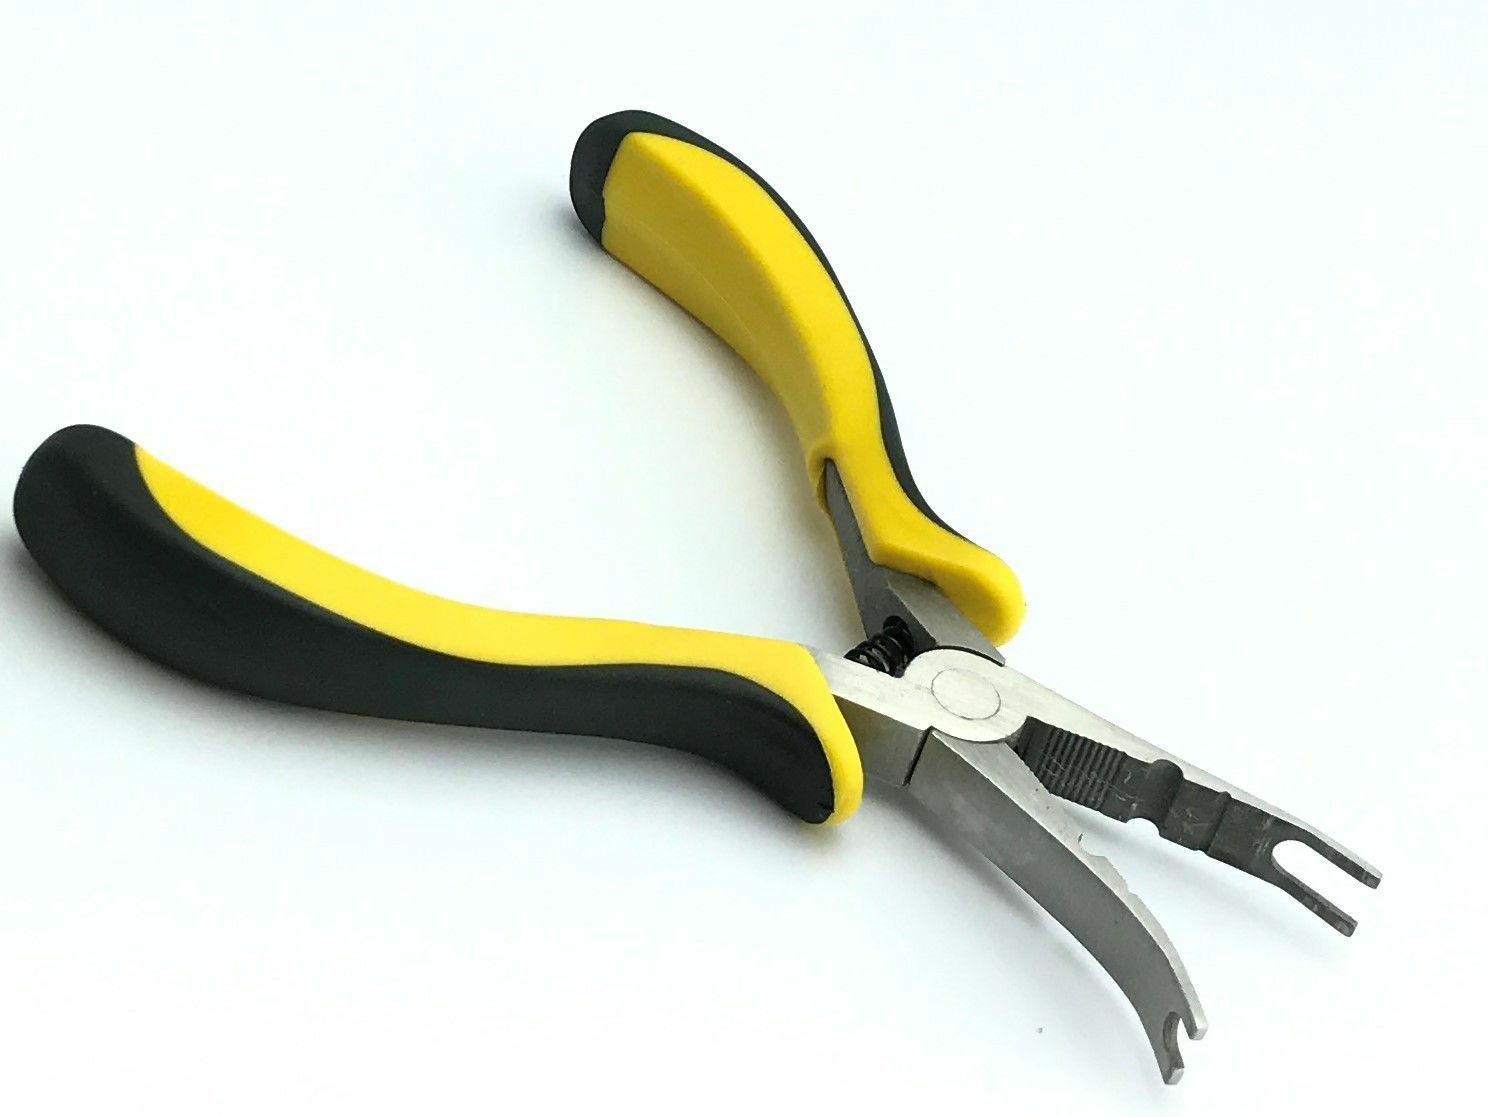 Curved Ball Link Pliers Rc Car Plane Tool R/c Pliers Helicopter (us Seller/ship)